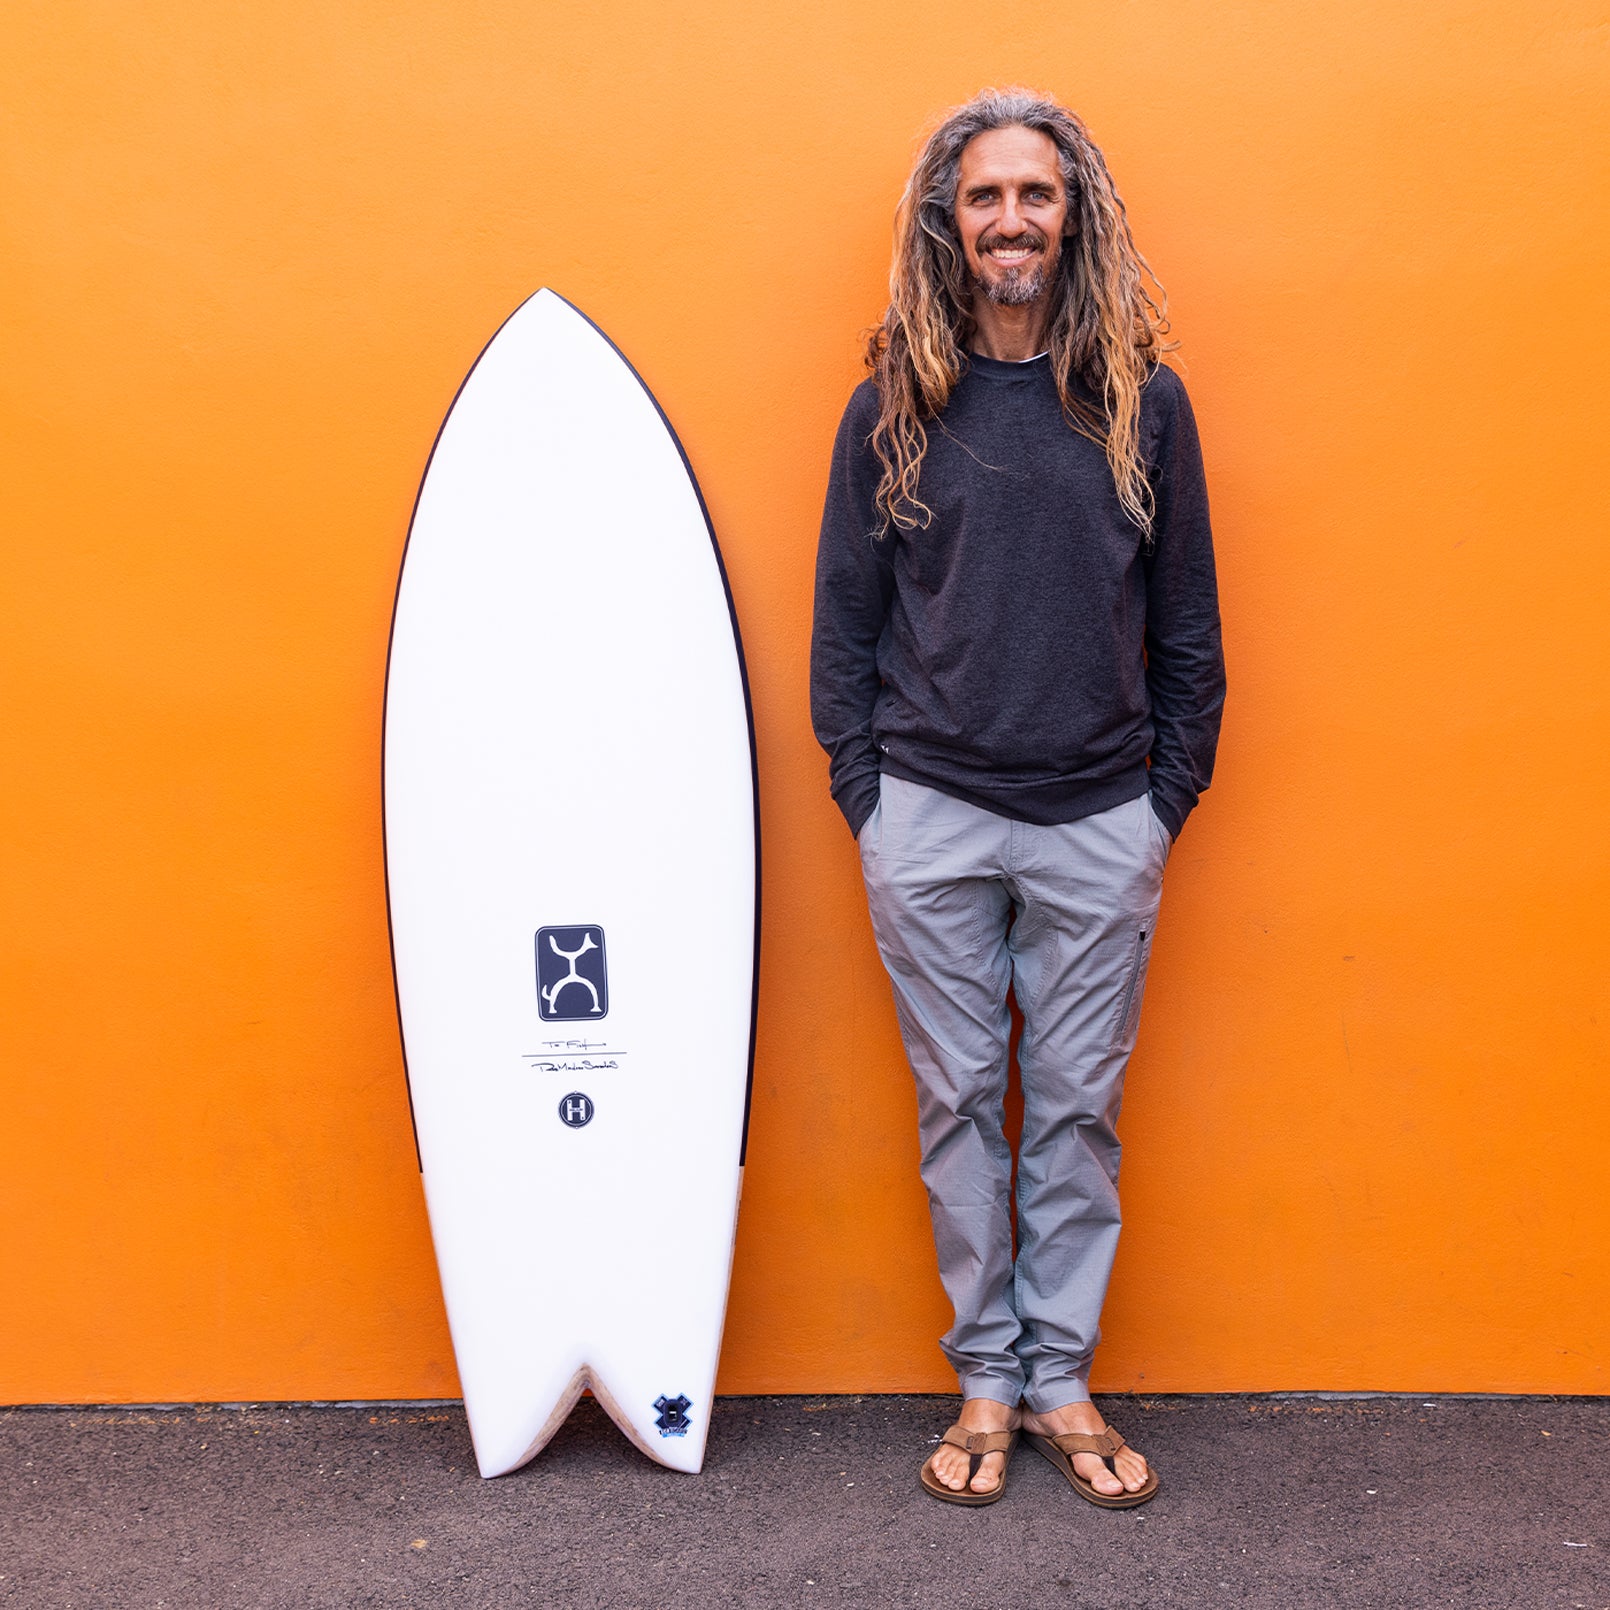 Firewire Surfboards USA | The future under your feet.